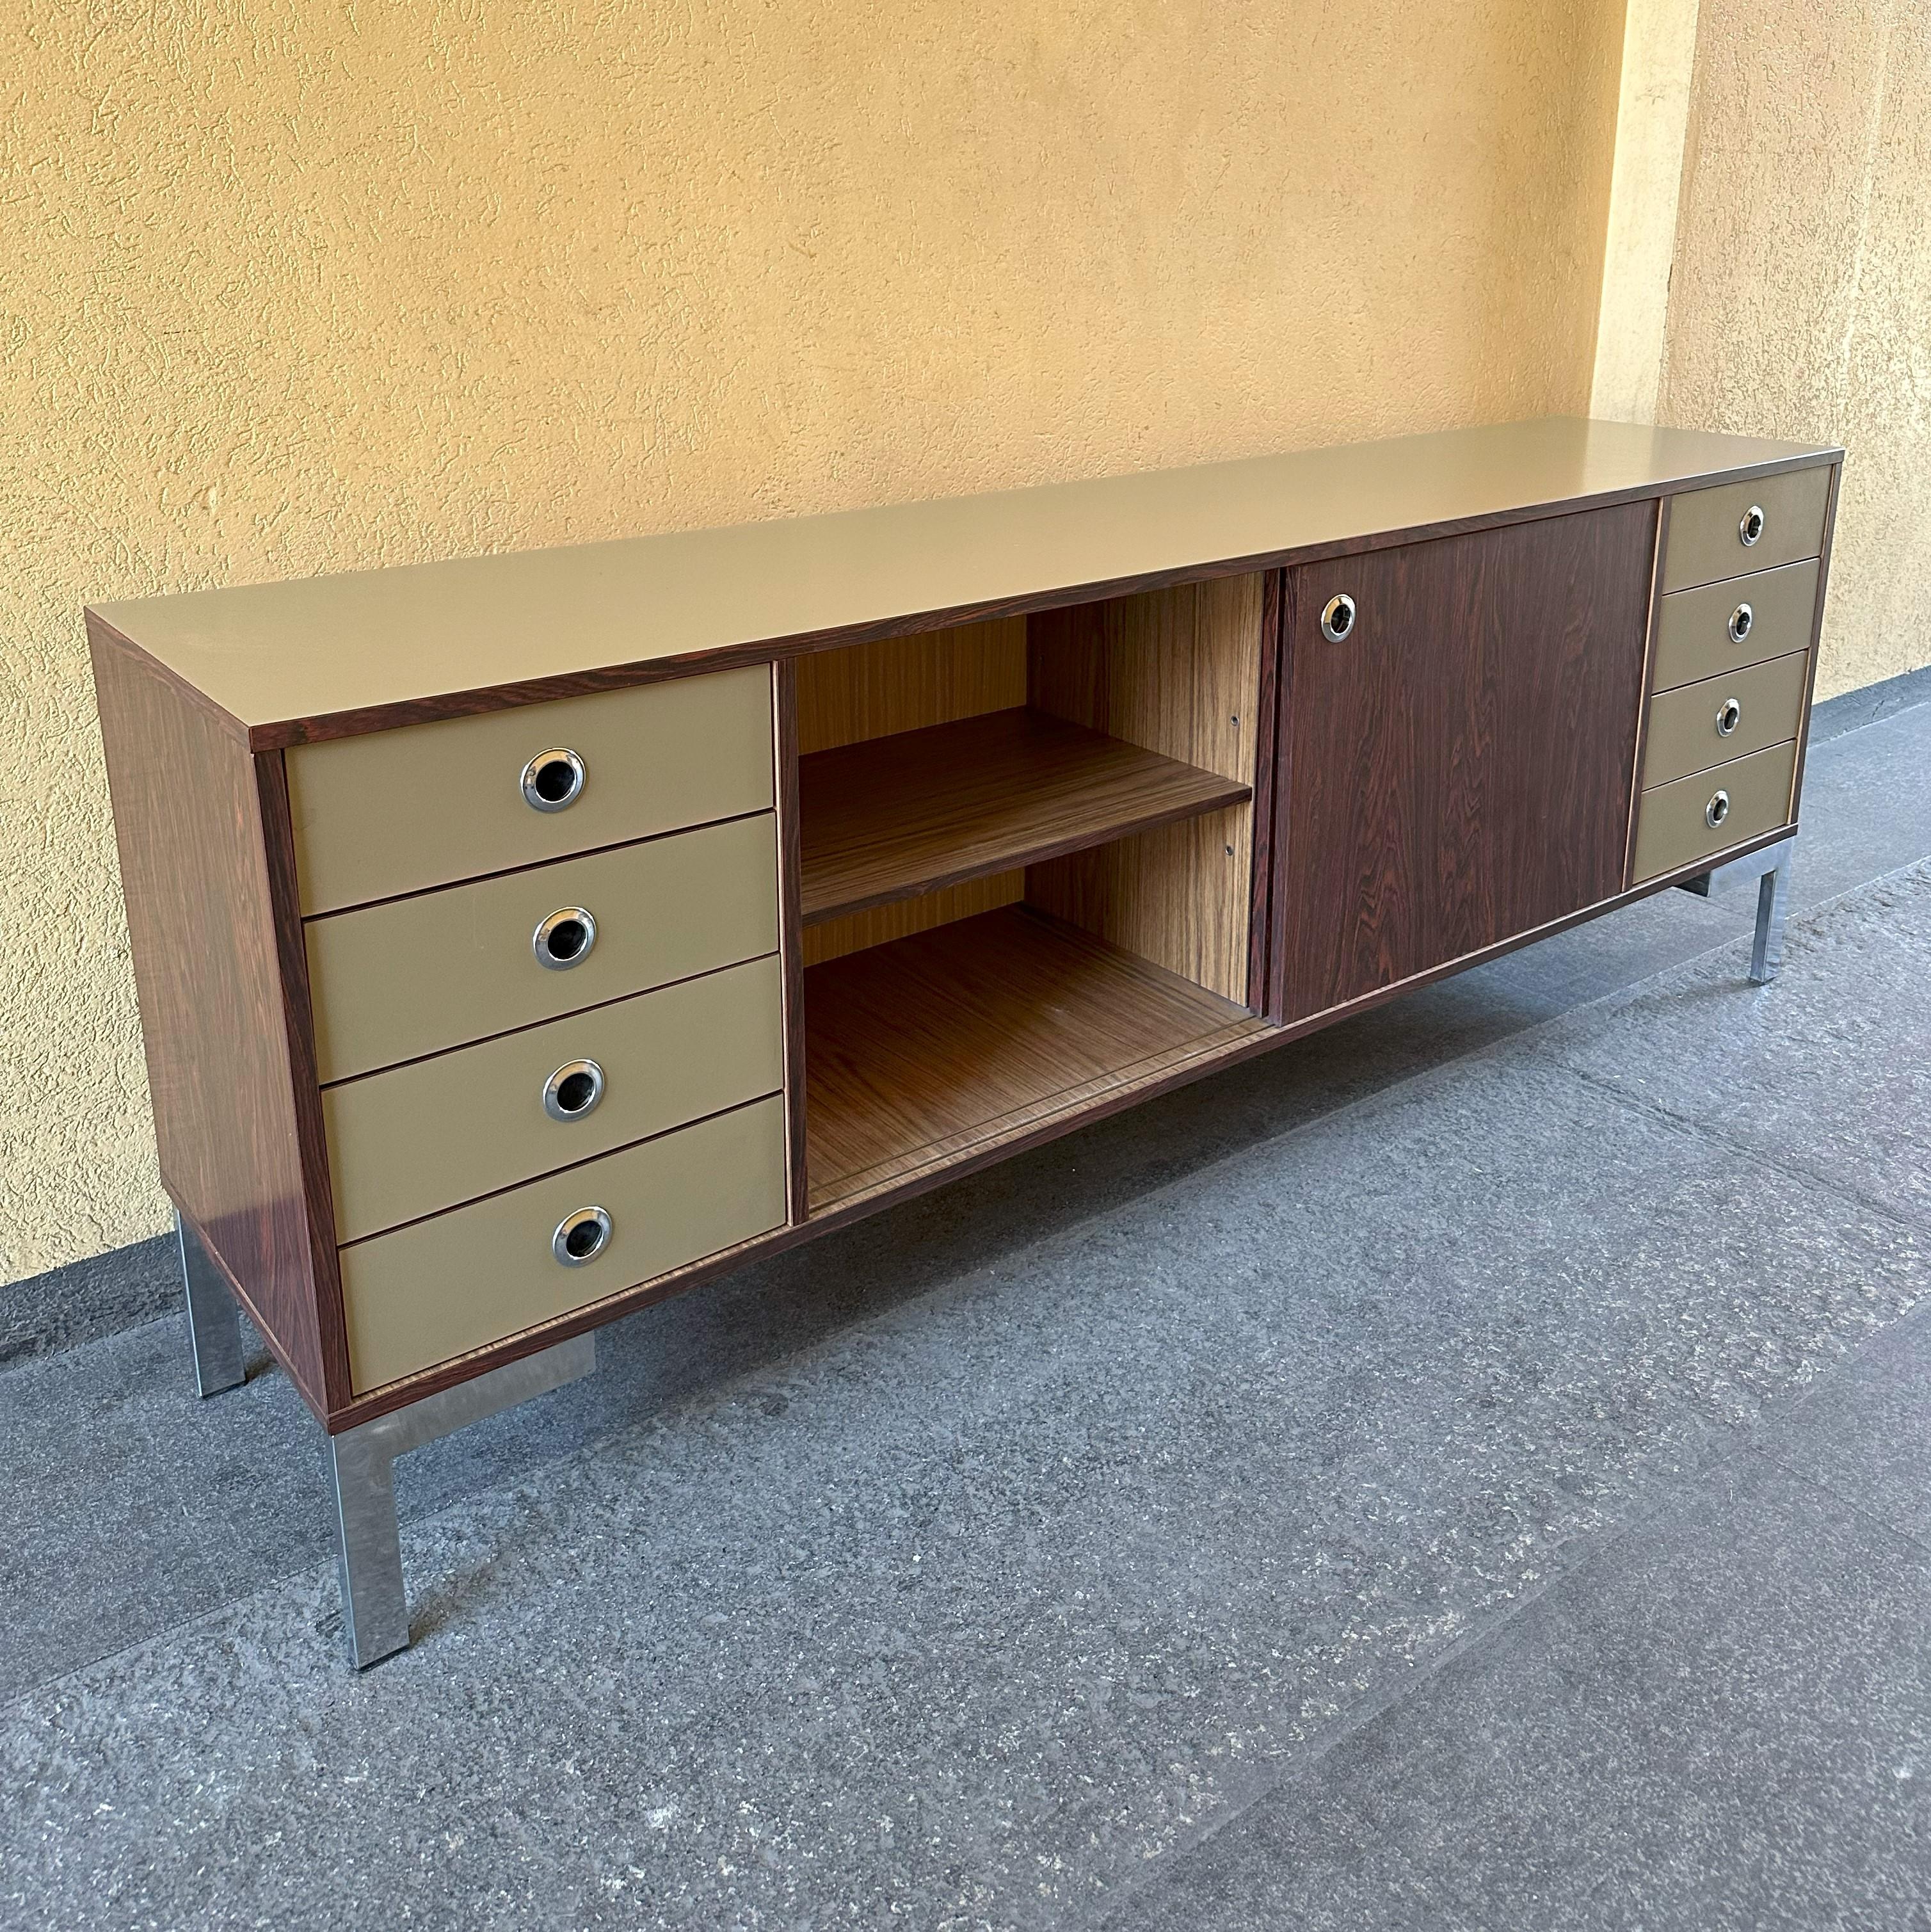 Midcentury-Modern Sideboard in Laminate '70 , Italian Manufacture  For Sale 2